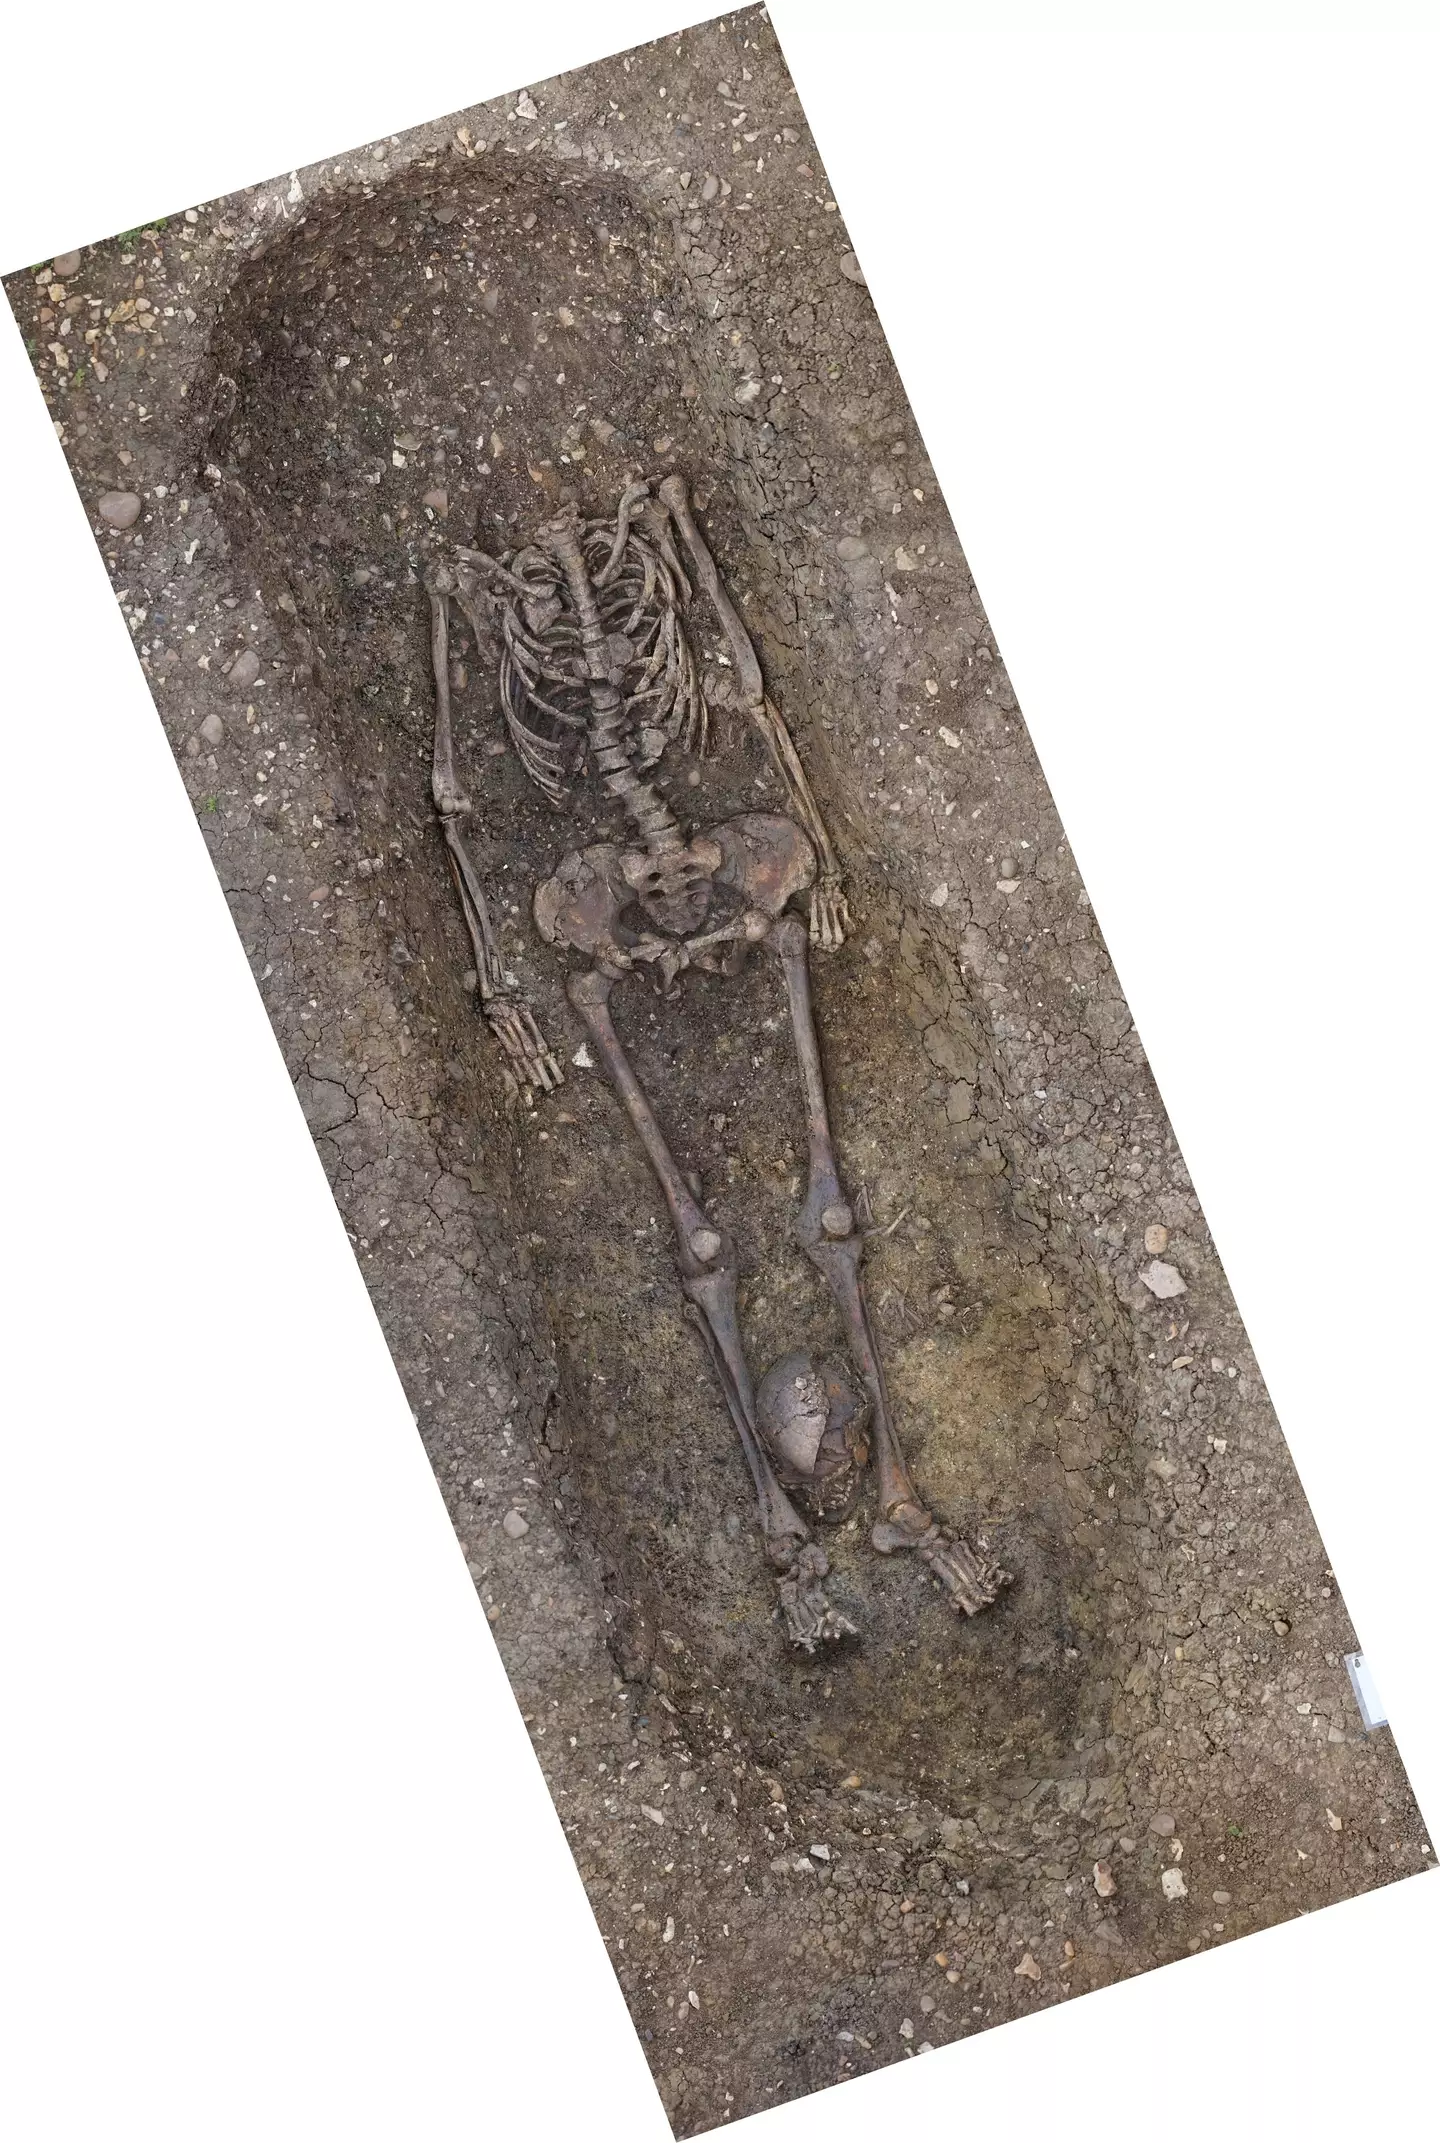 Archaeologists found more than 400 skeletons. (HS2/PA)